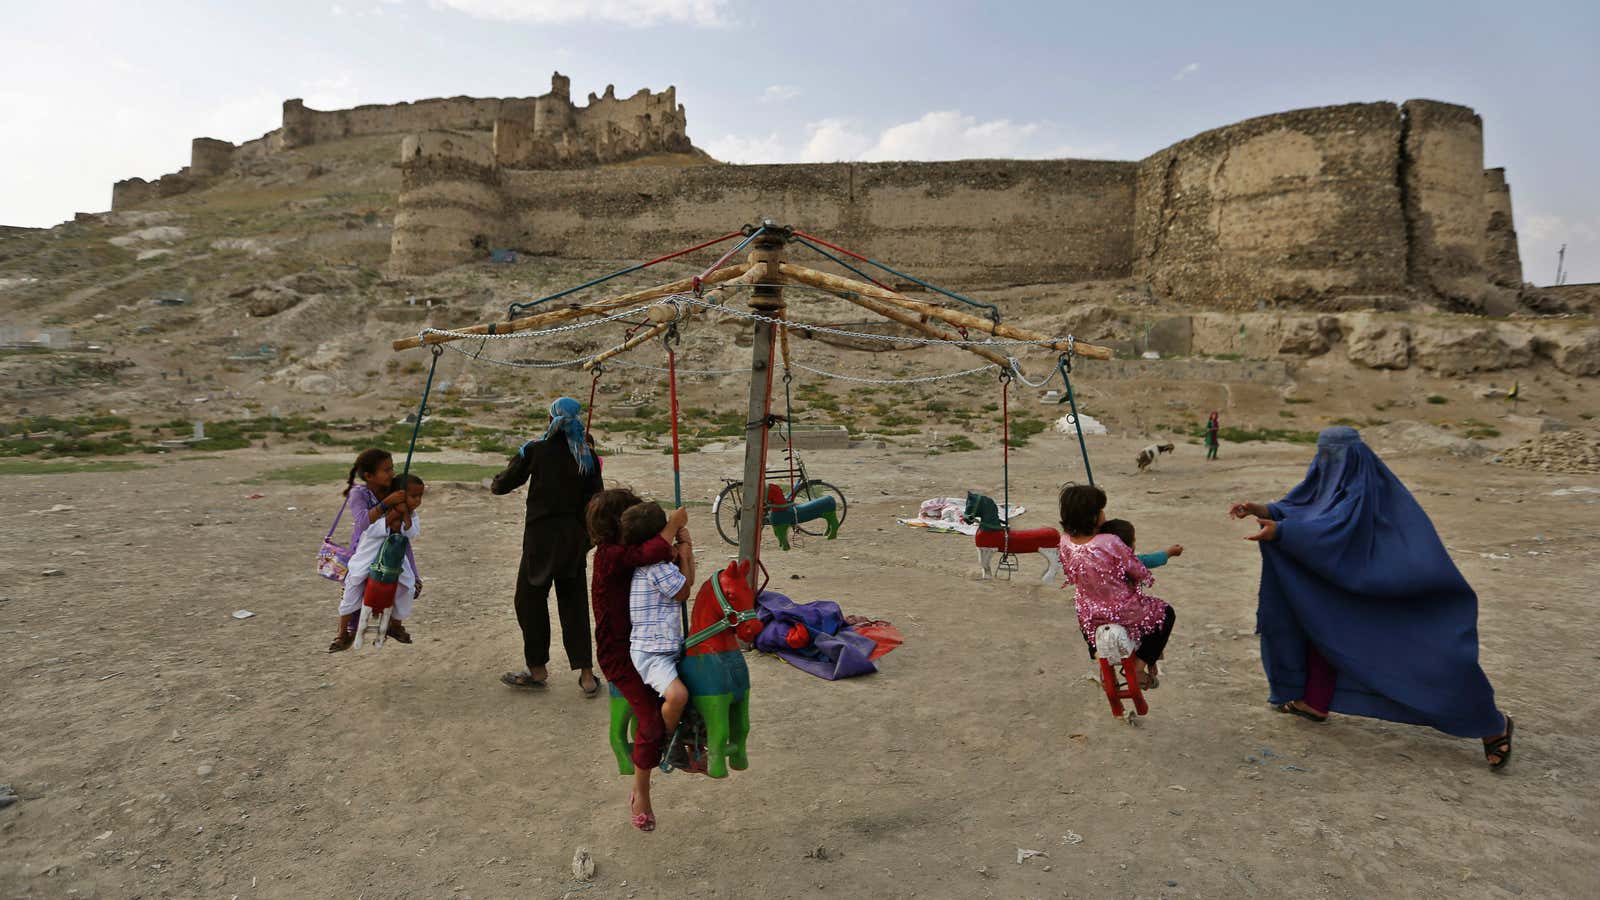 Children play on a carnival ride during Eid al-Fitr Holiday in Kabul July 31, 2014. The Eid al-Fitr festival marks the end of the Muslim holy fasting month of Ramadan.